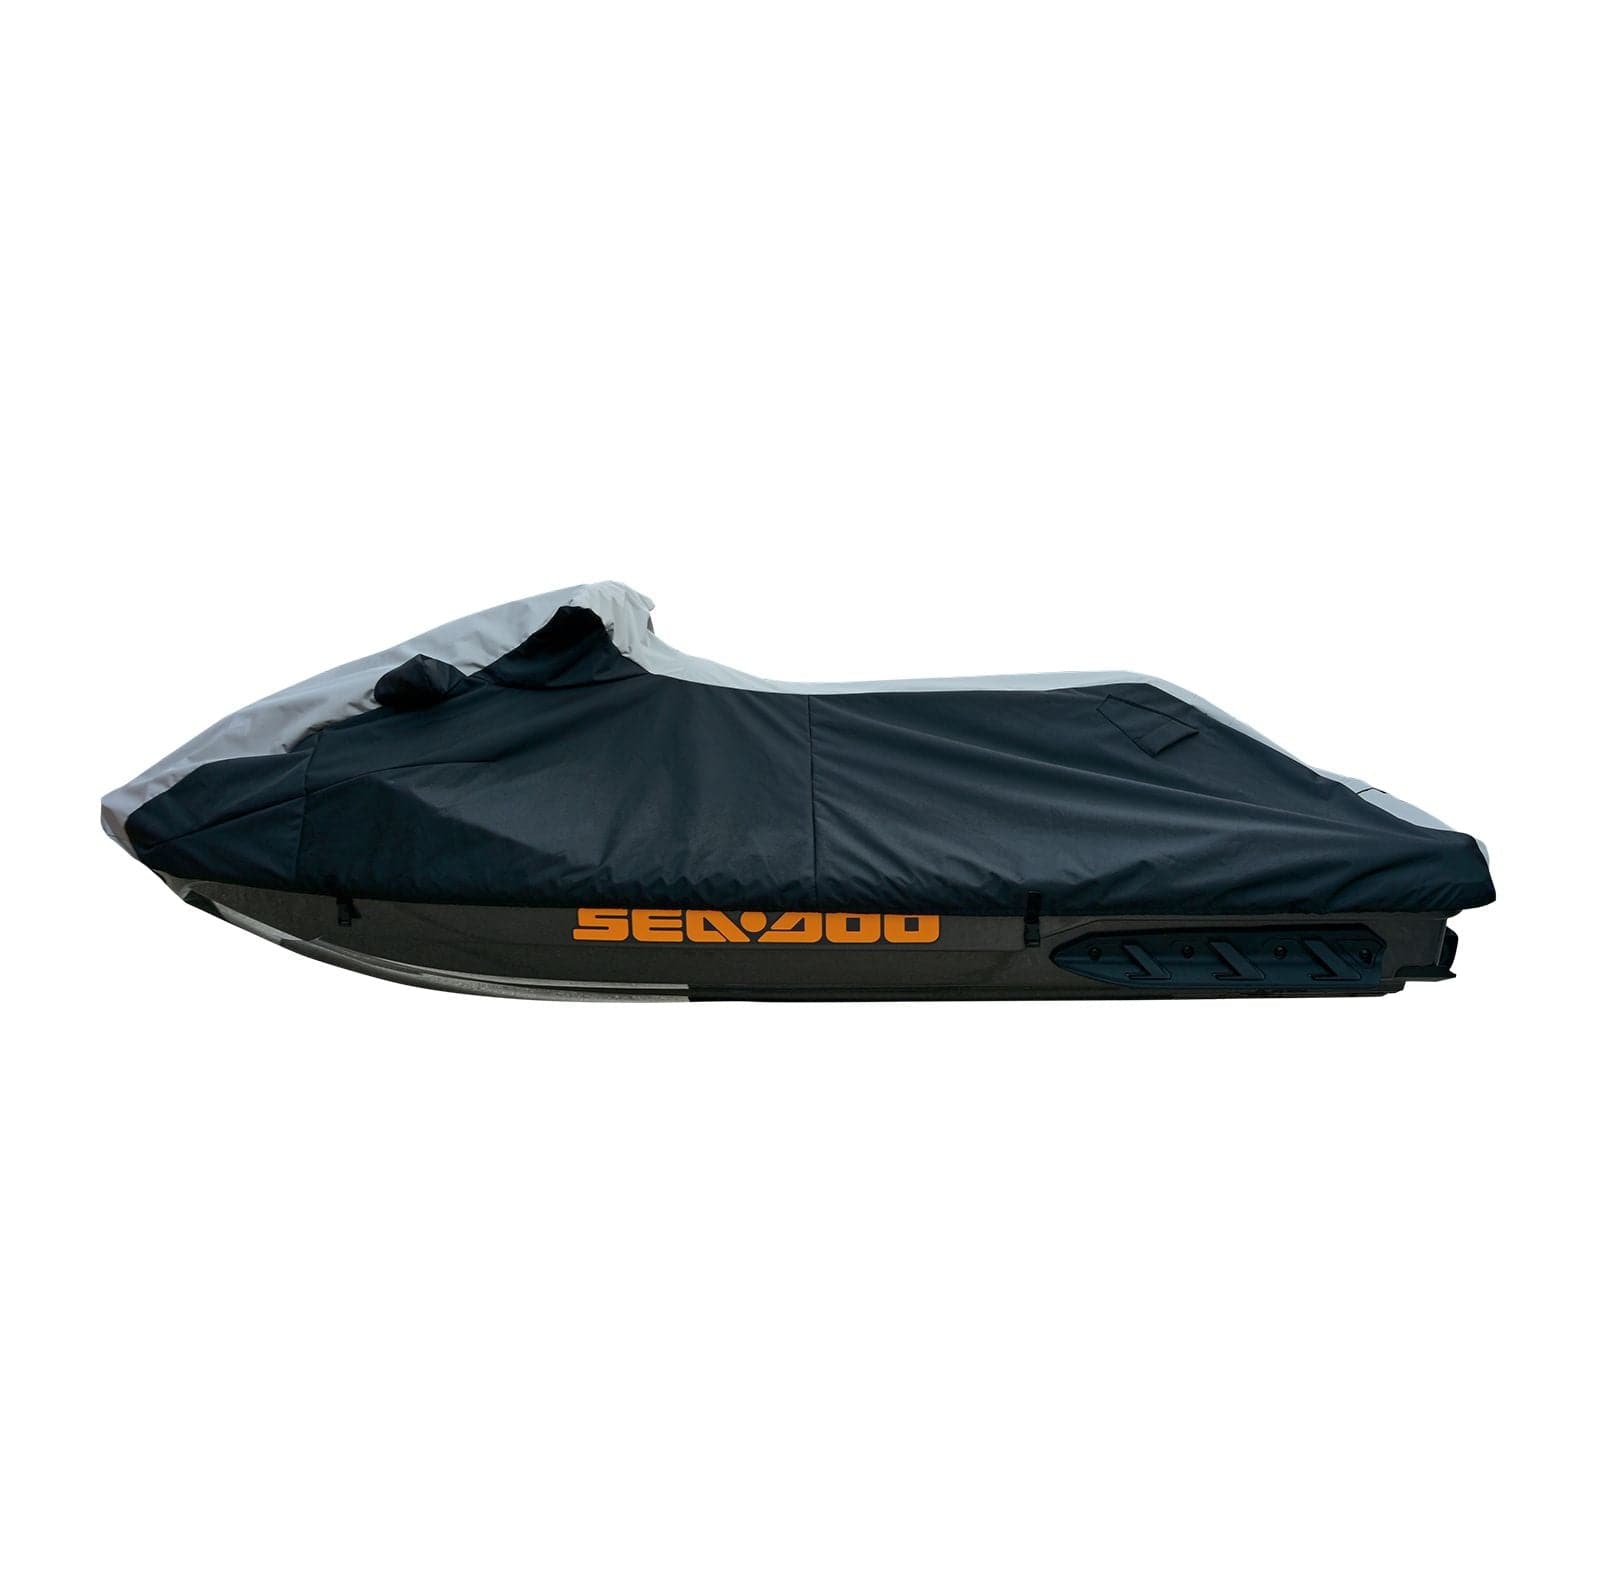 Trailerable Storage cover with vents for Yamaha 1996-2018 Super Jet 700